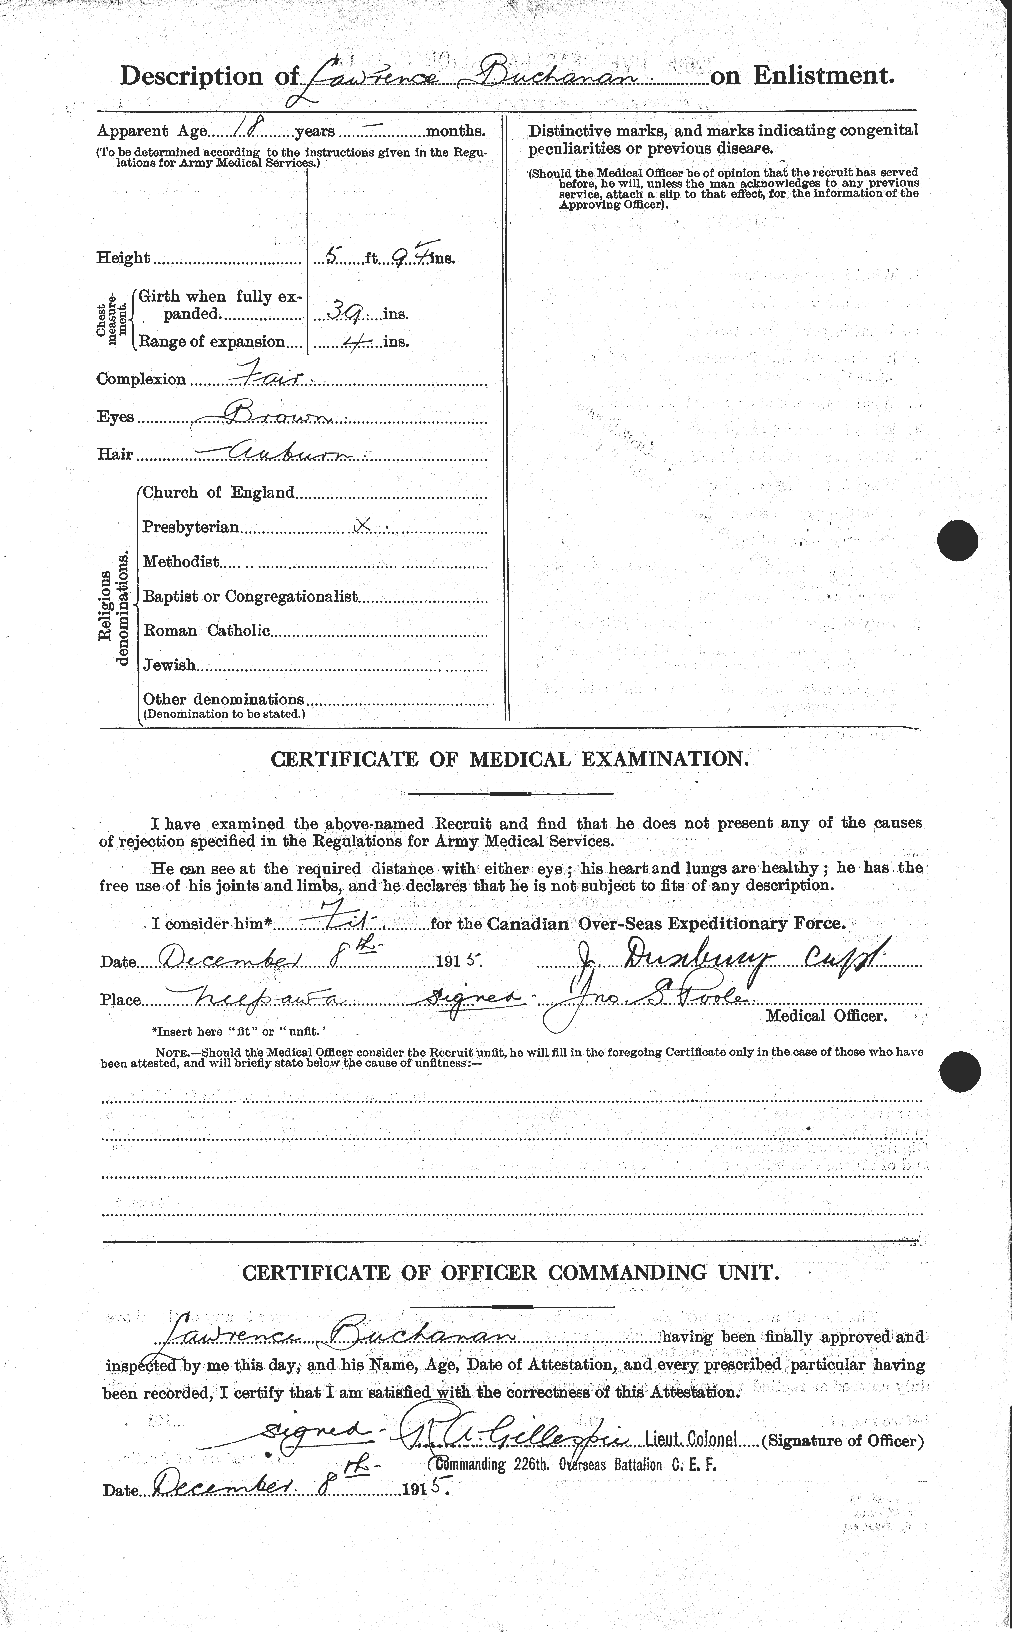 Personnel Records of the First World War - CEF 271571b